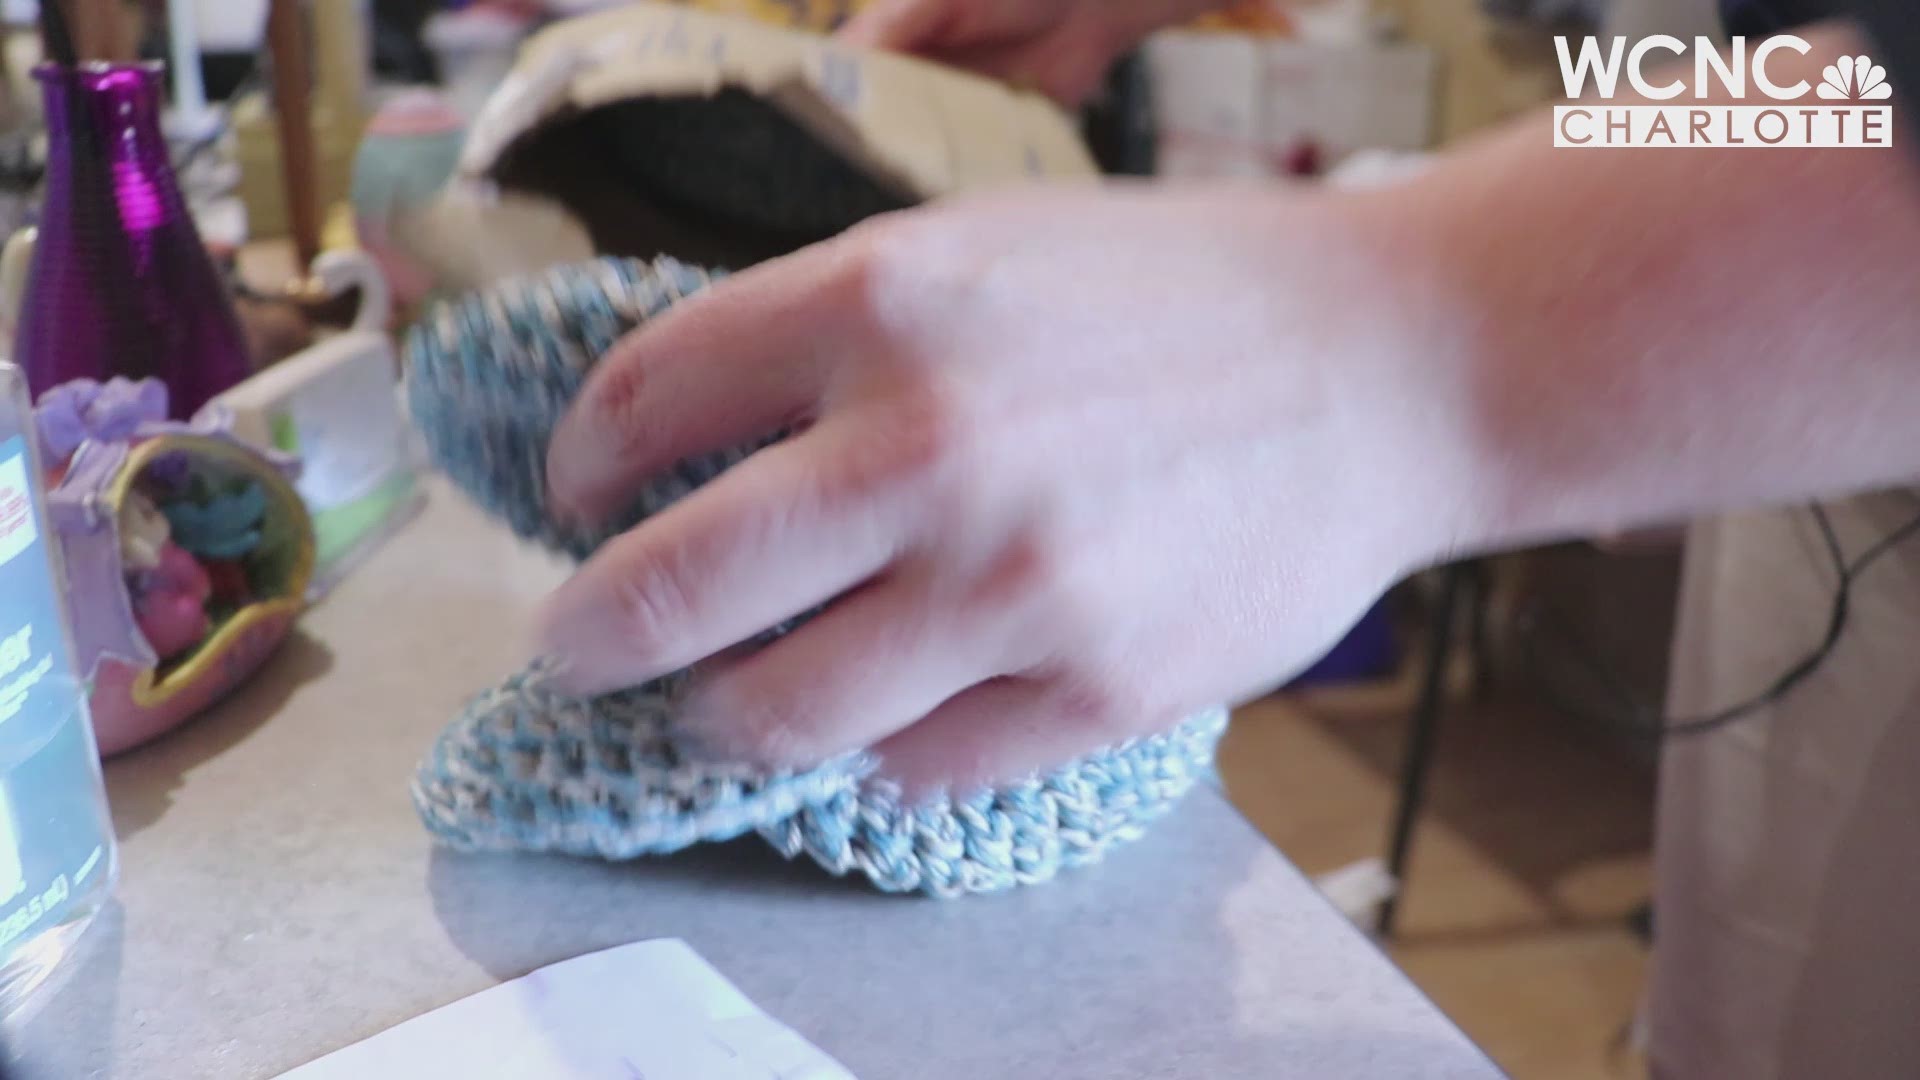 Thousands flood Charlotte rescue group with knitted nests, handwritten notes for  baby birds